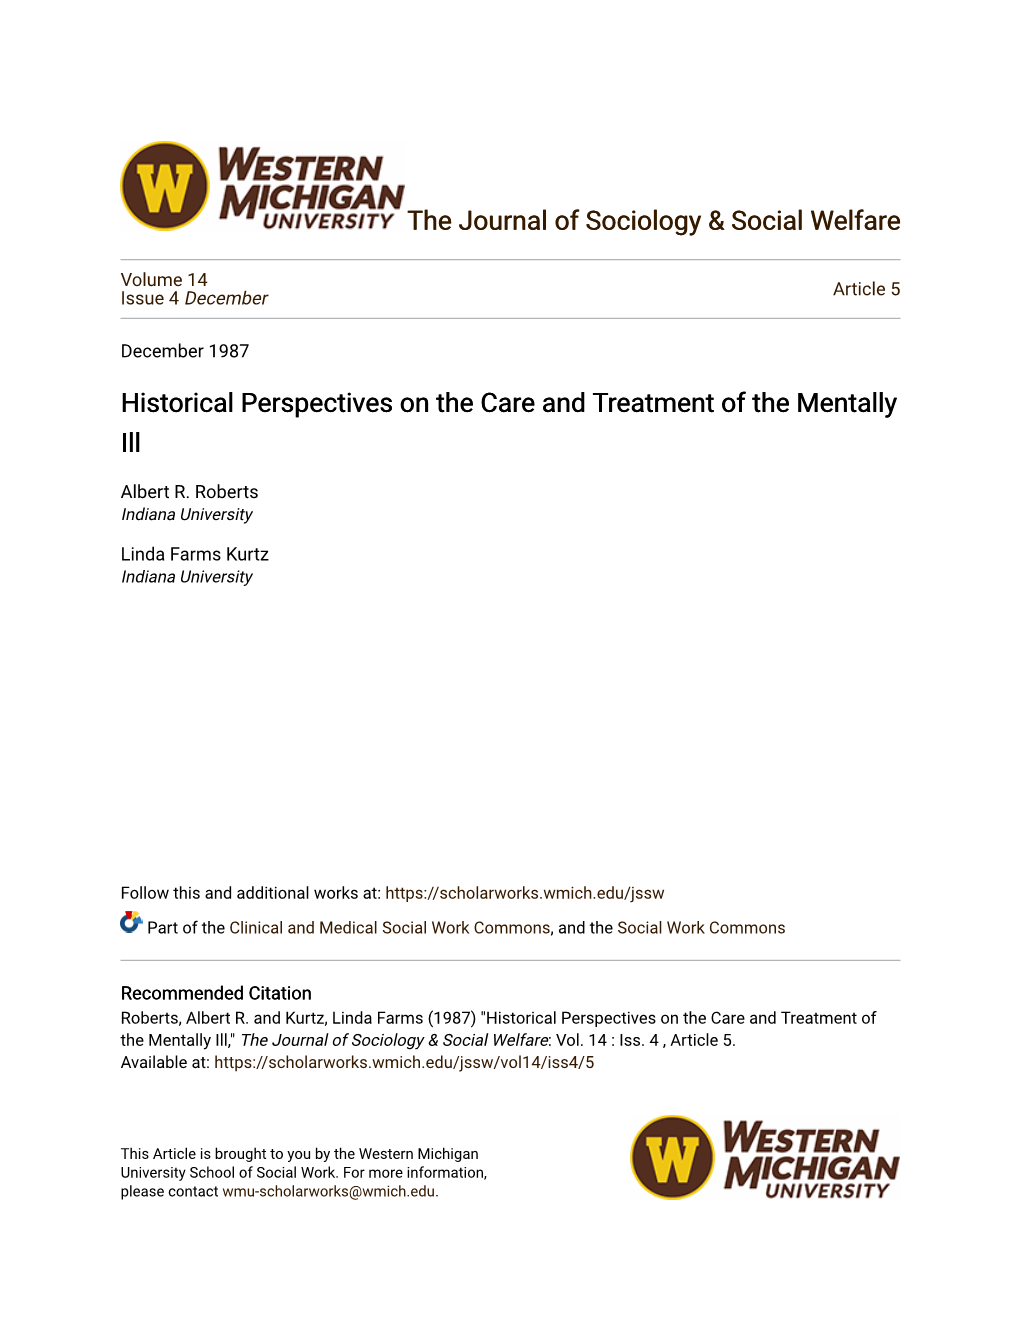 Historical Perspectives on the Care and Treatment of the Mentally Ill